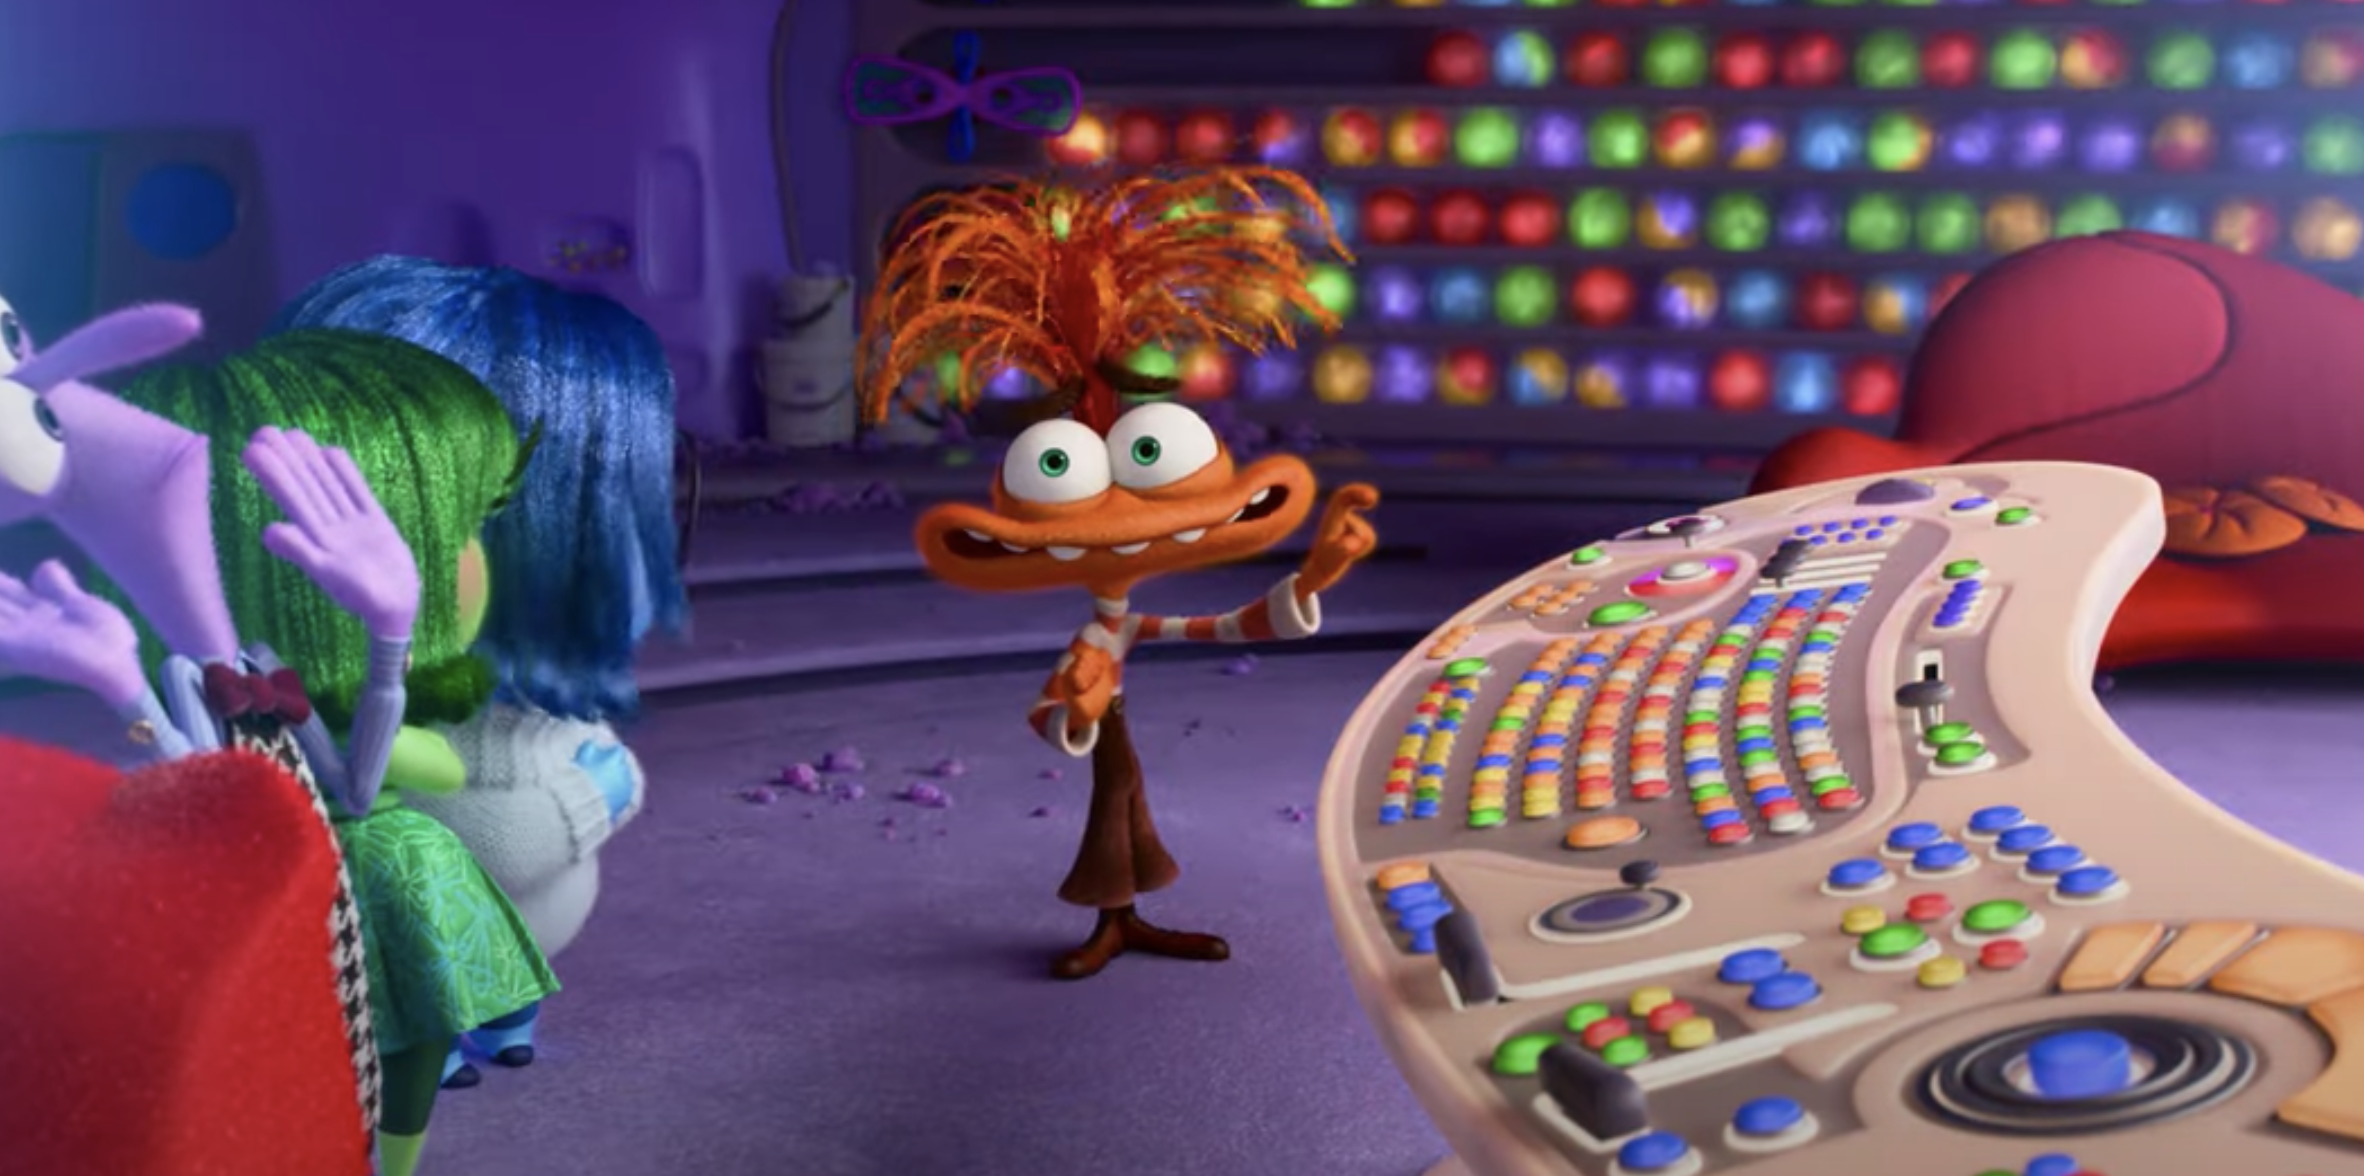 Exploring New Emotions in Pixar&#8217;s Inside Out 2